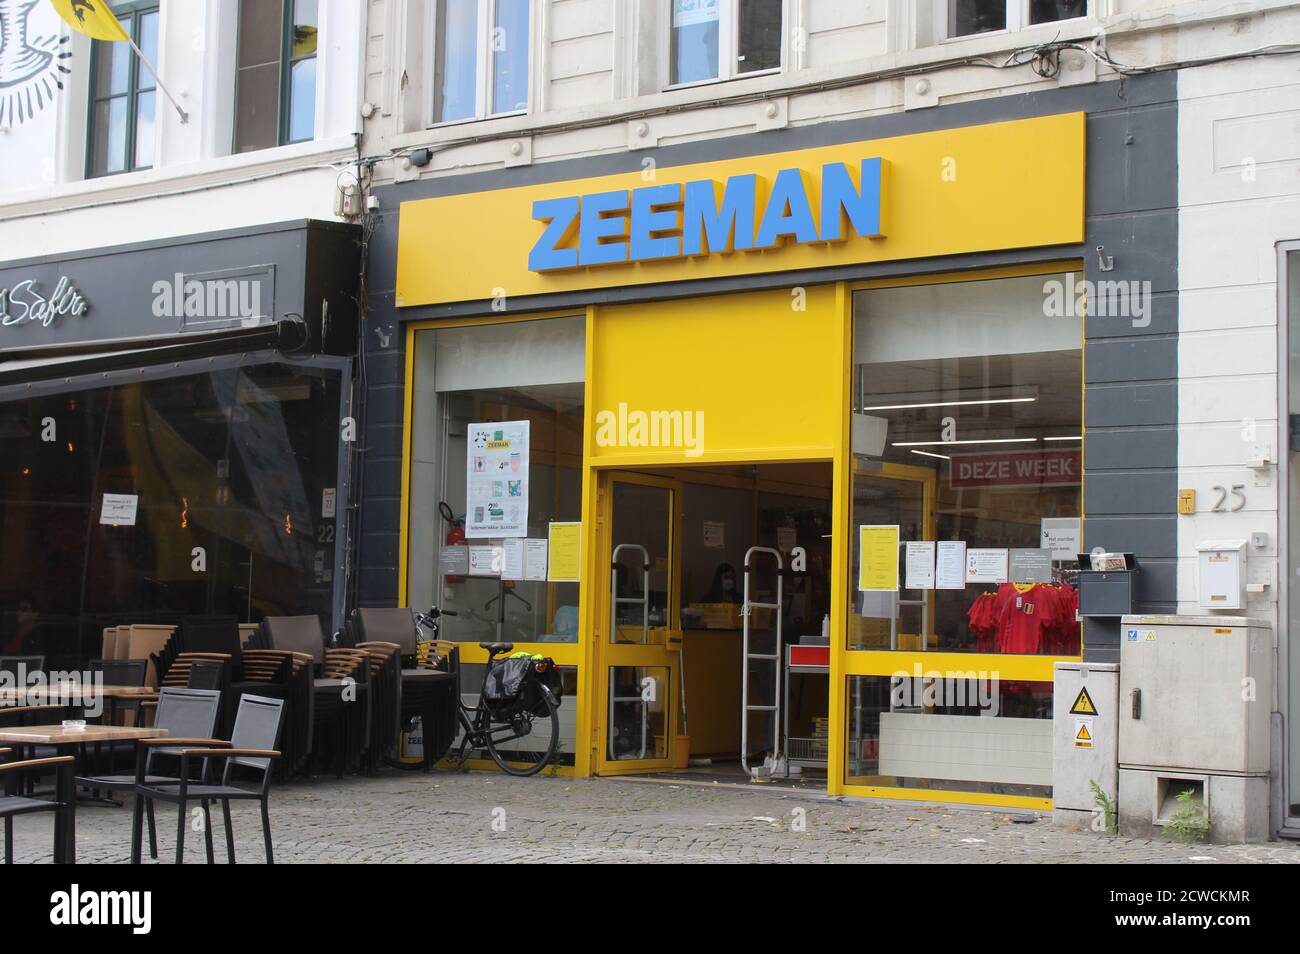 AALST, BELGIUM, 6 JULY 2020: Exterior view of a Zeeman store in Flanders. Zeeman is a Dutch owned textiles chain store with over 1,300 outlets in seve Stock Photo